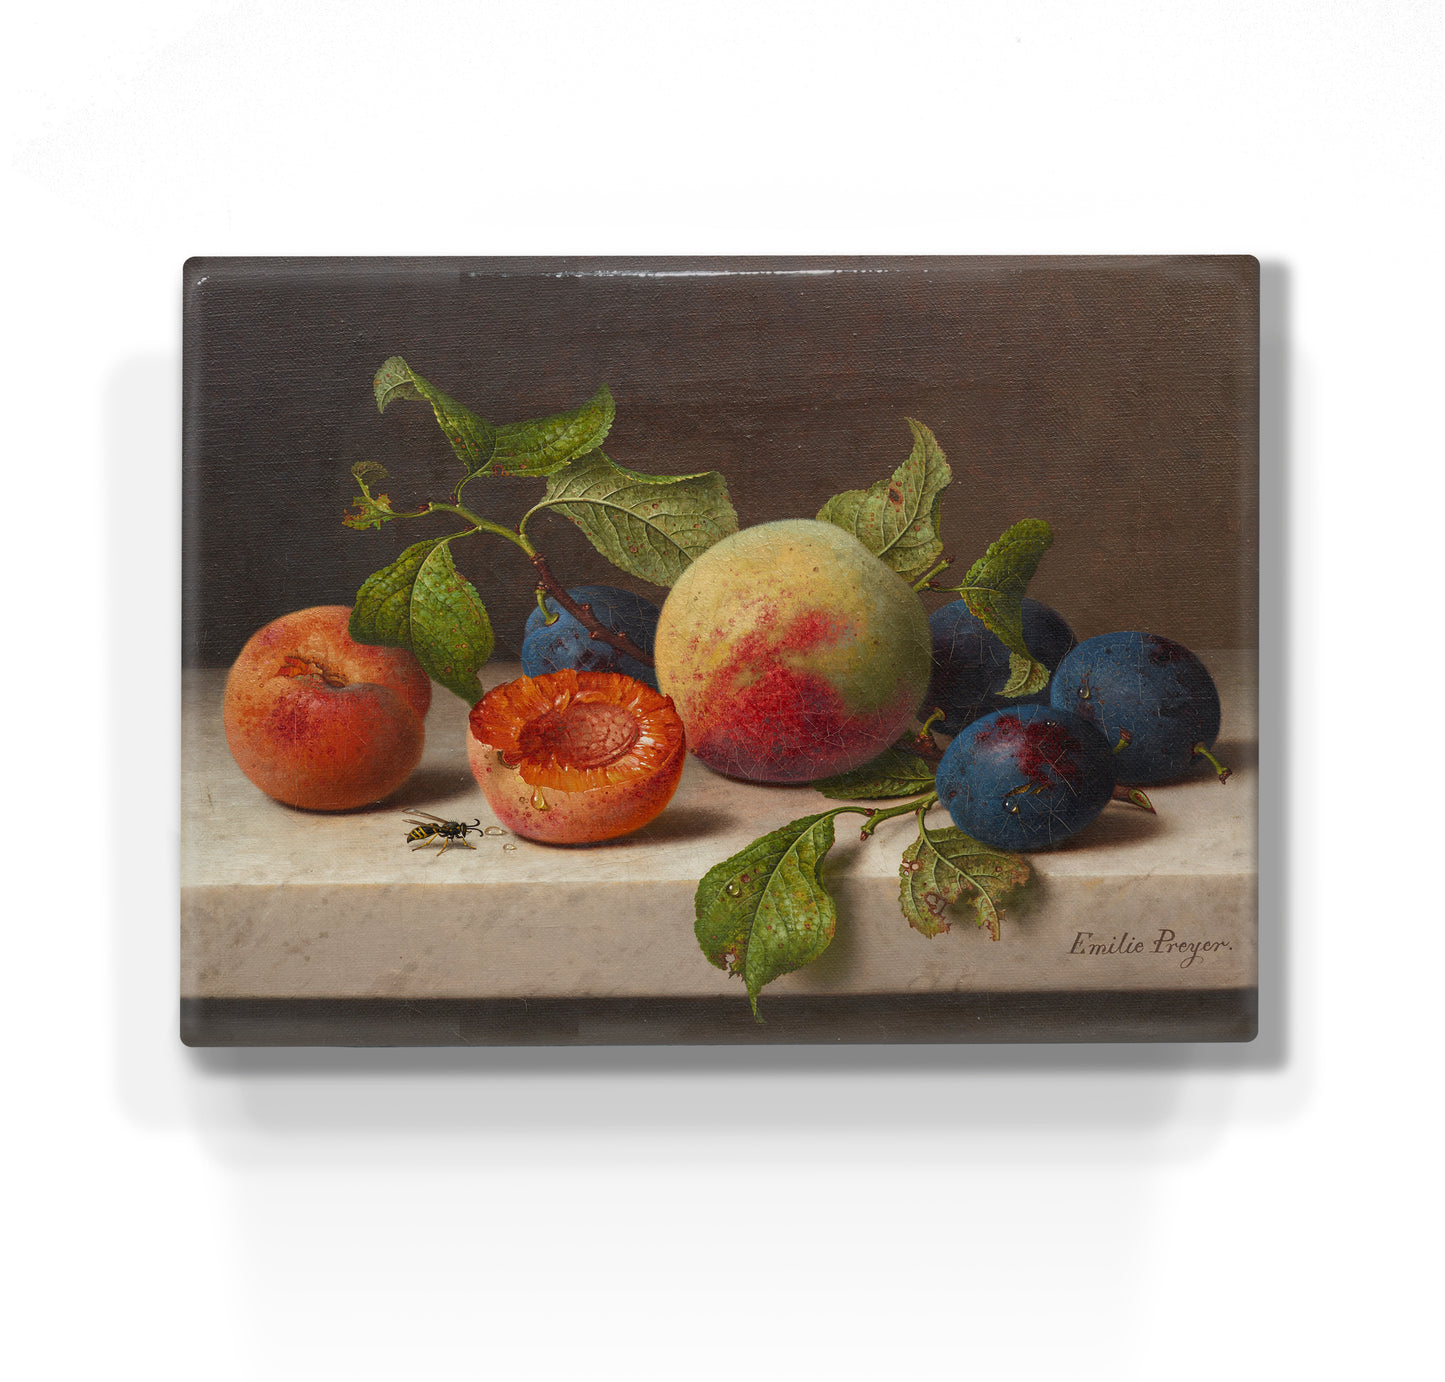 Laque print - Still life with fruit and a wasp - Emilie Preyer - 26 x 19.5 cm - LP099